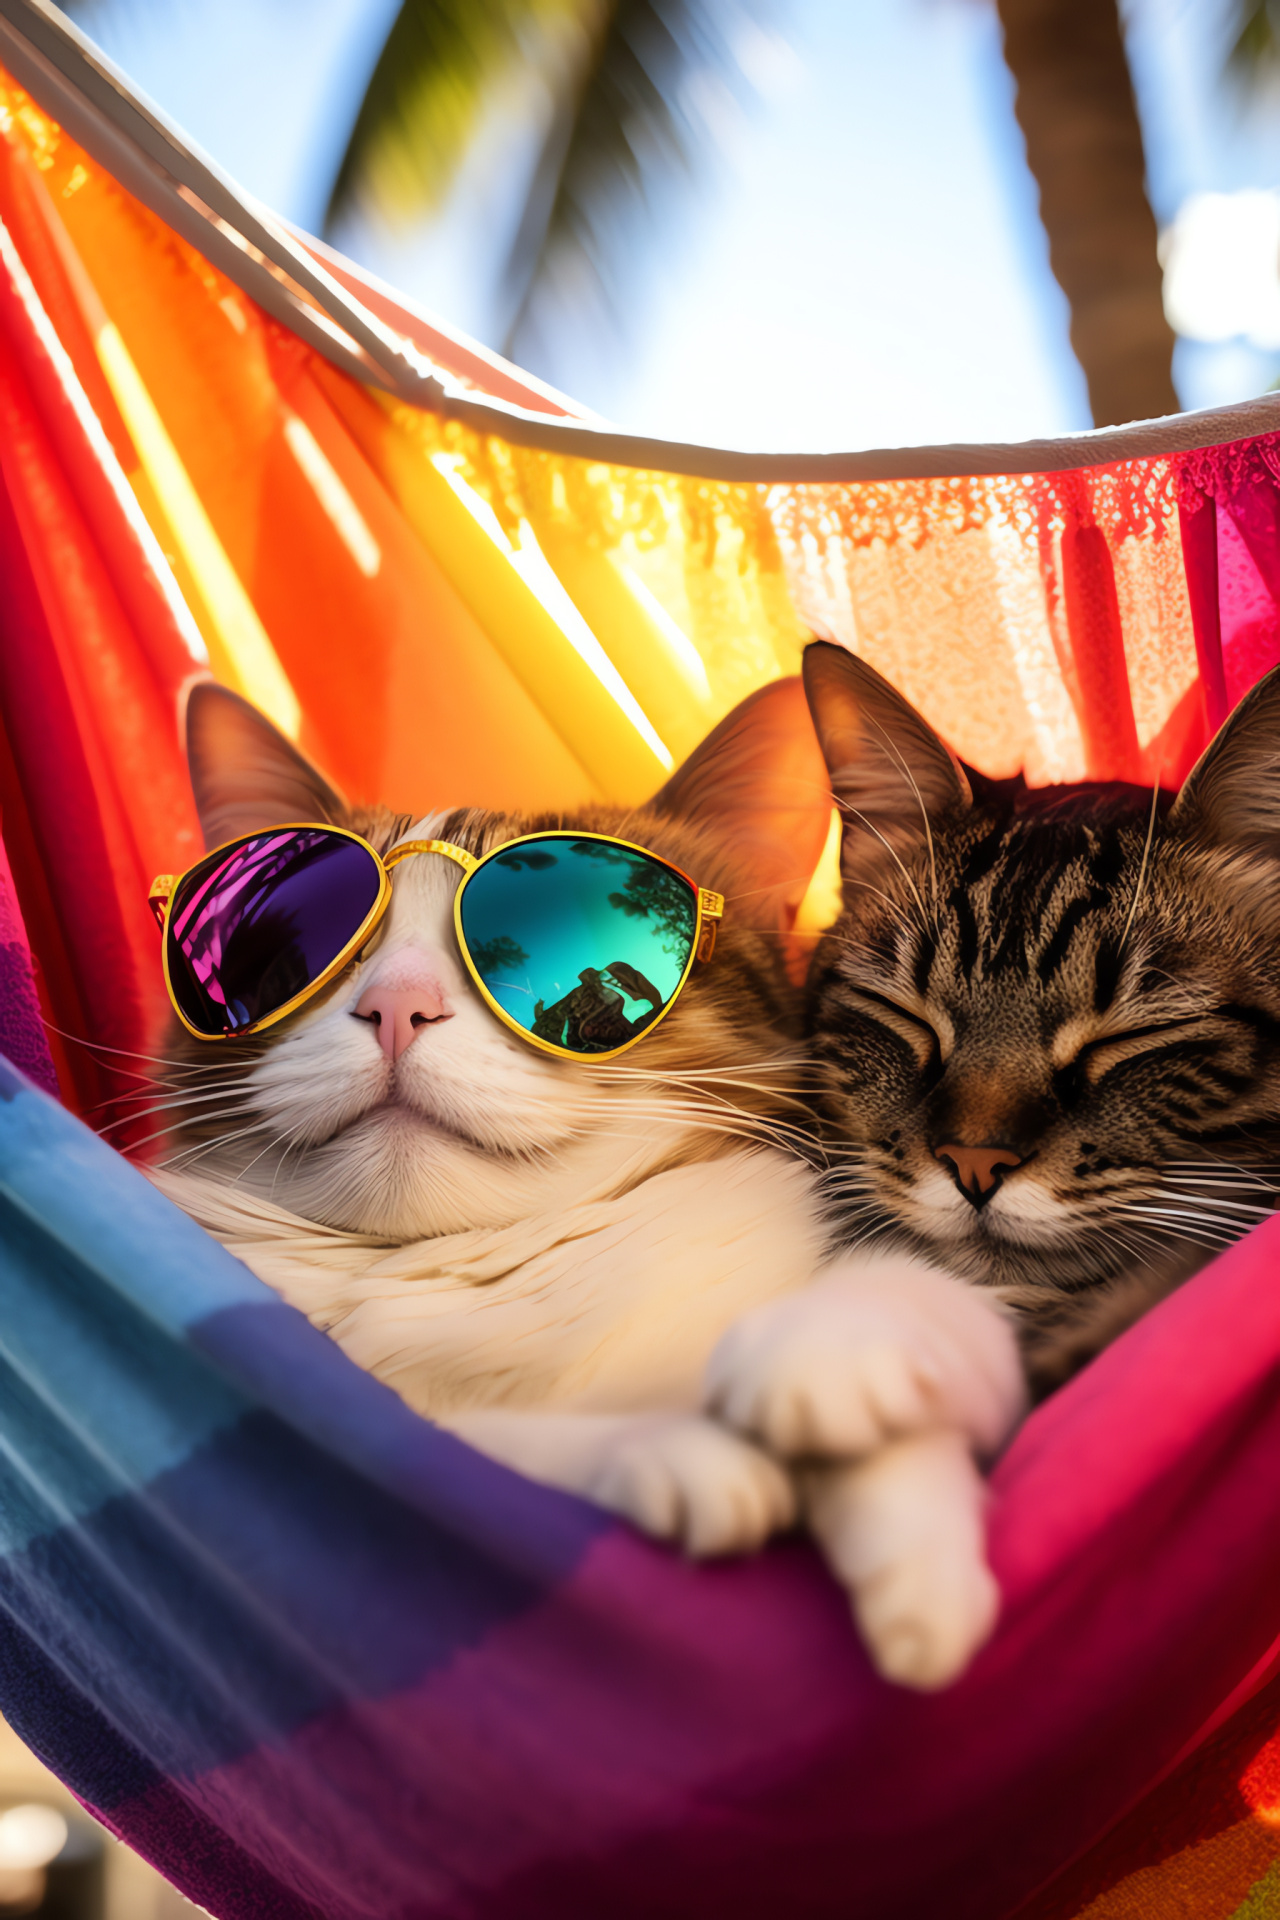 Endearing pets relax, Feline eye protection, Multicolored rest area, Tropical tree species, Island vibes, HD Phone Image